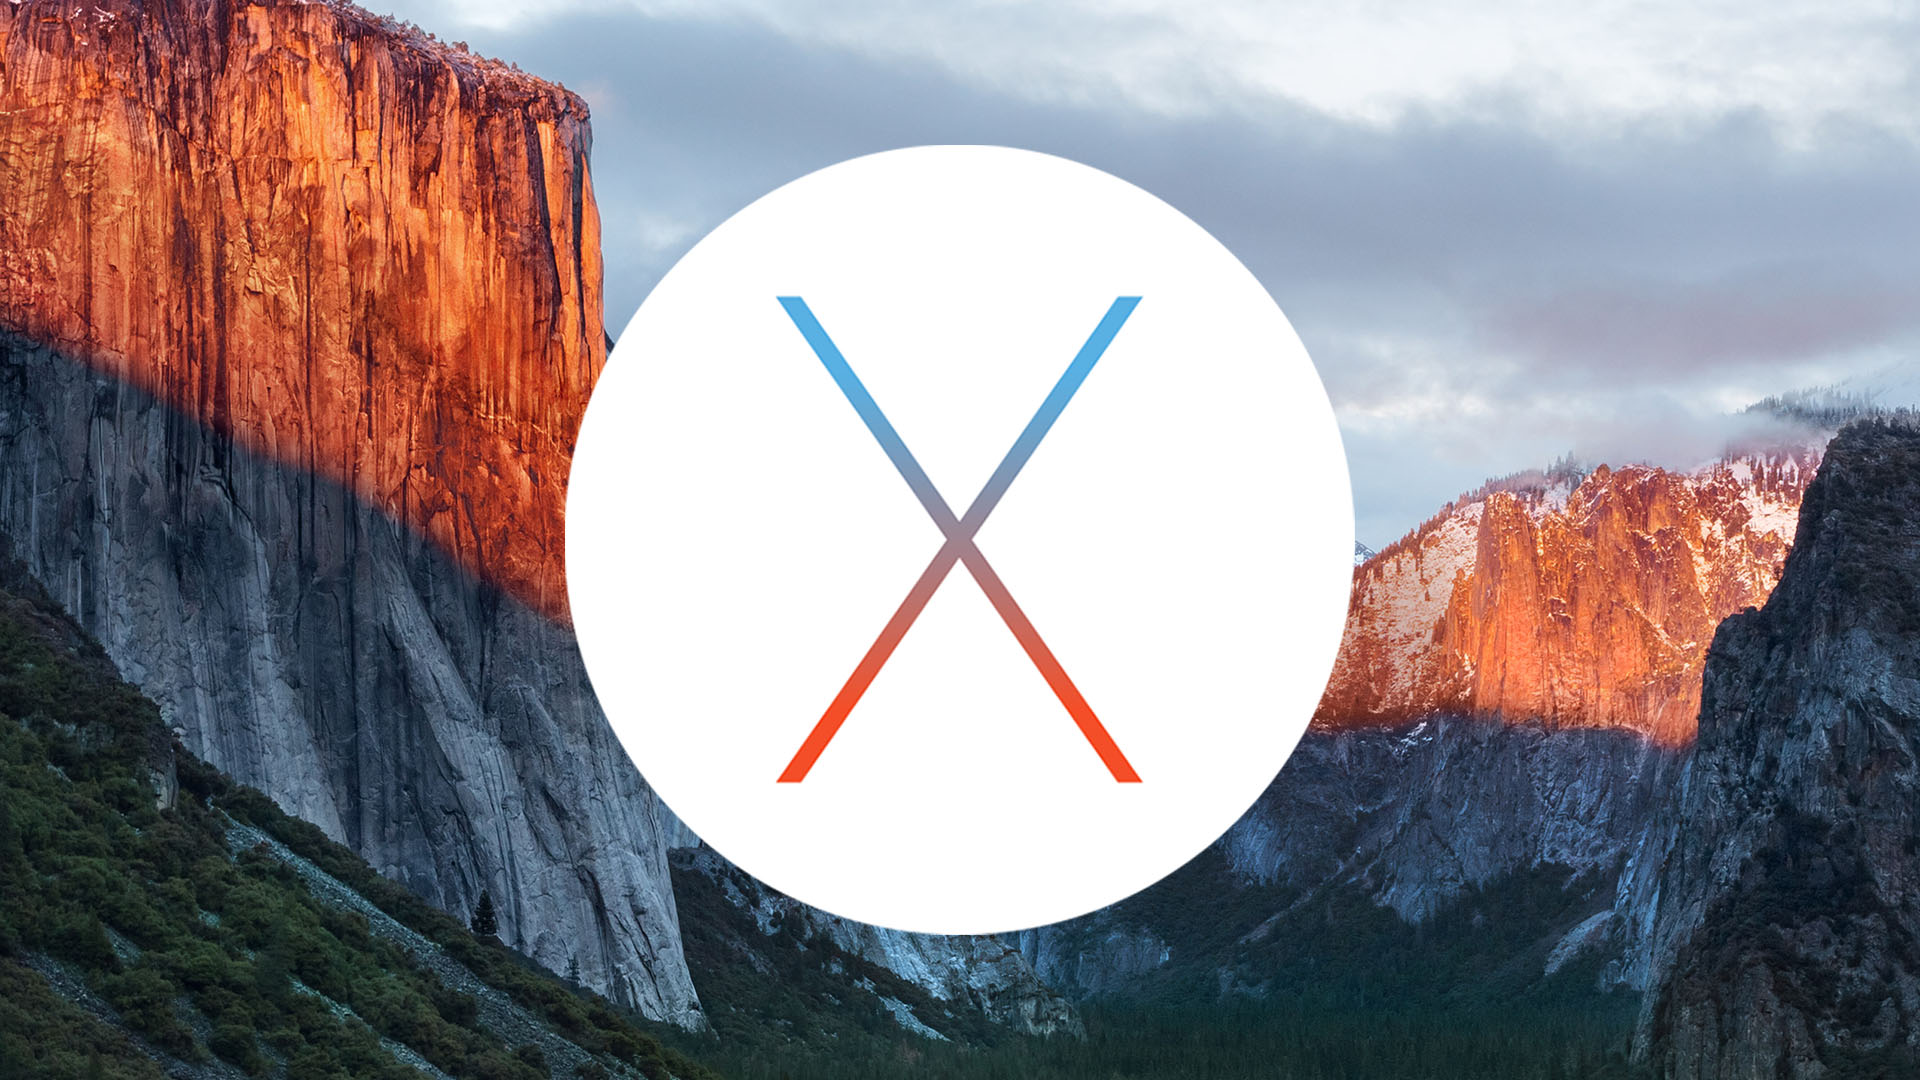 OS X El Capitan - What's New in the Latest Version?